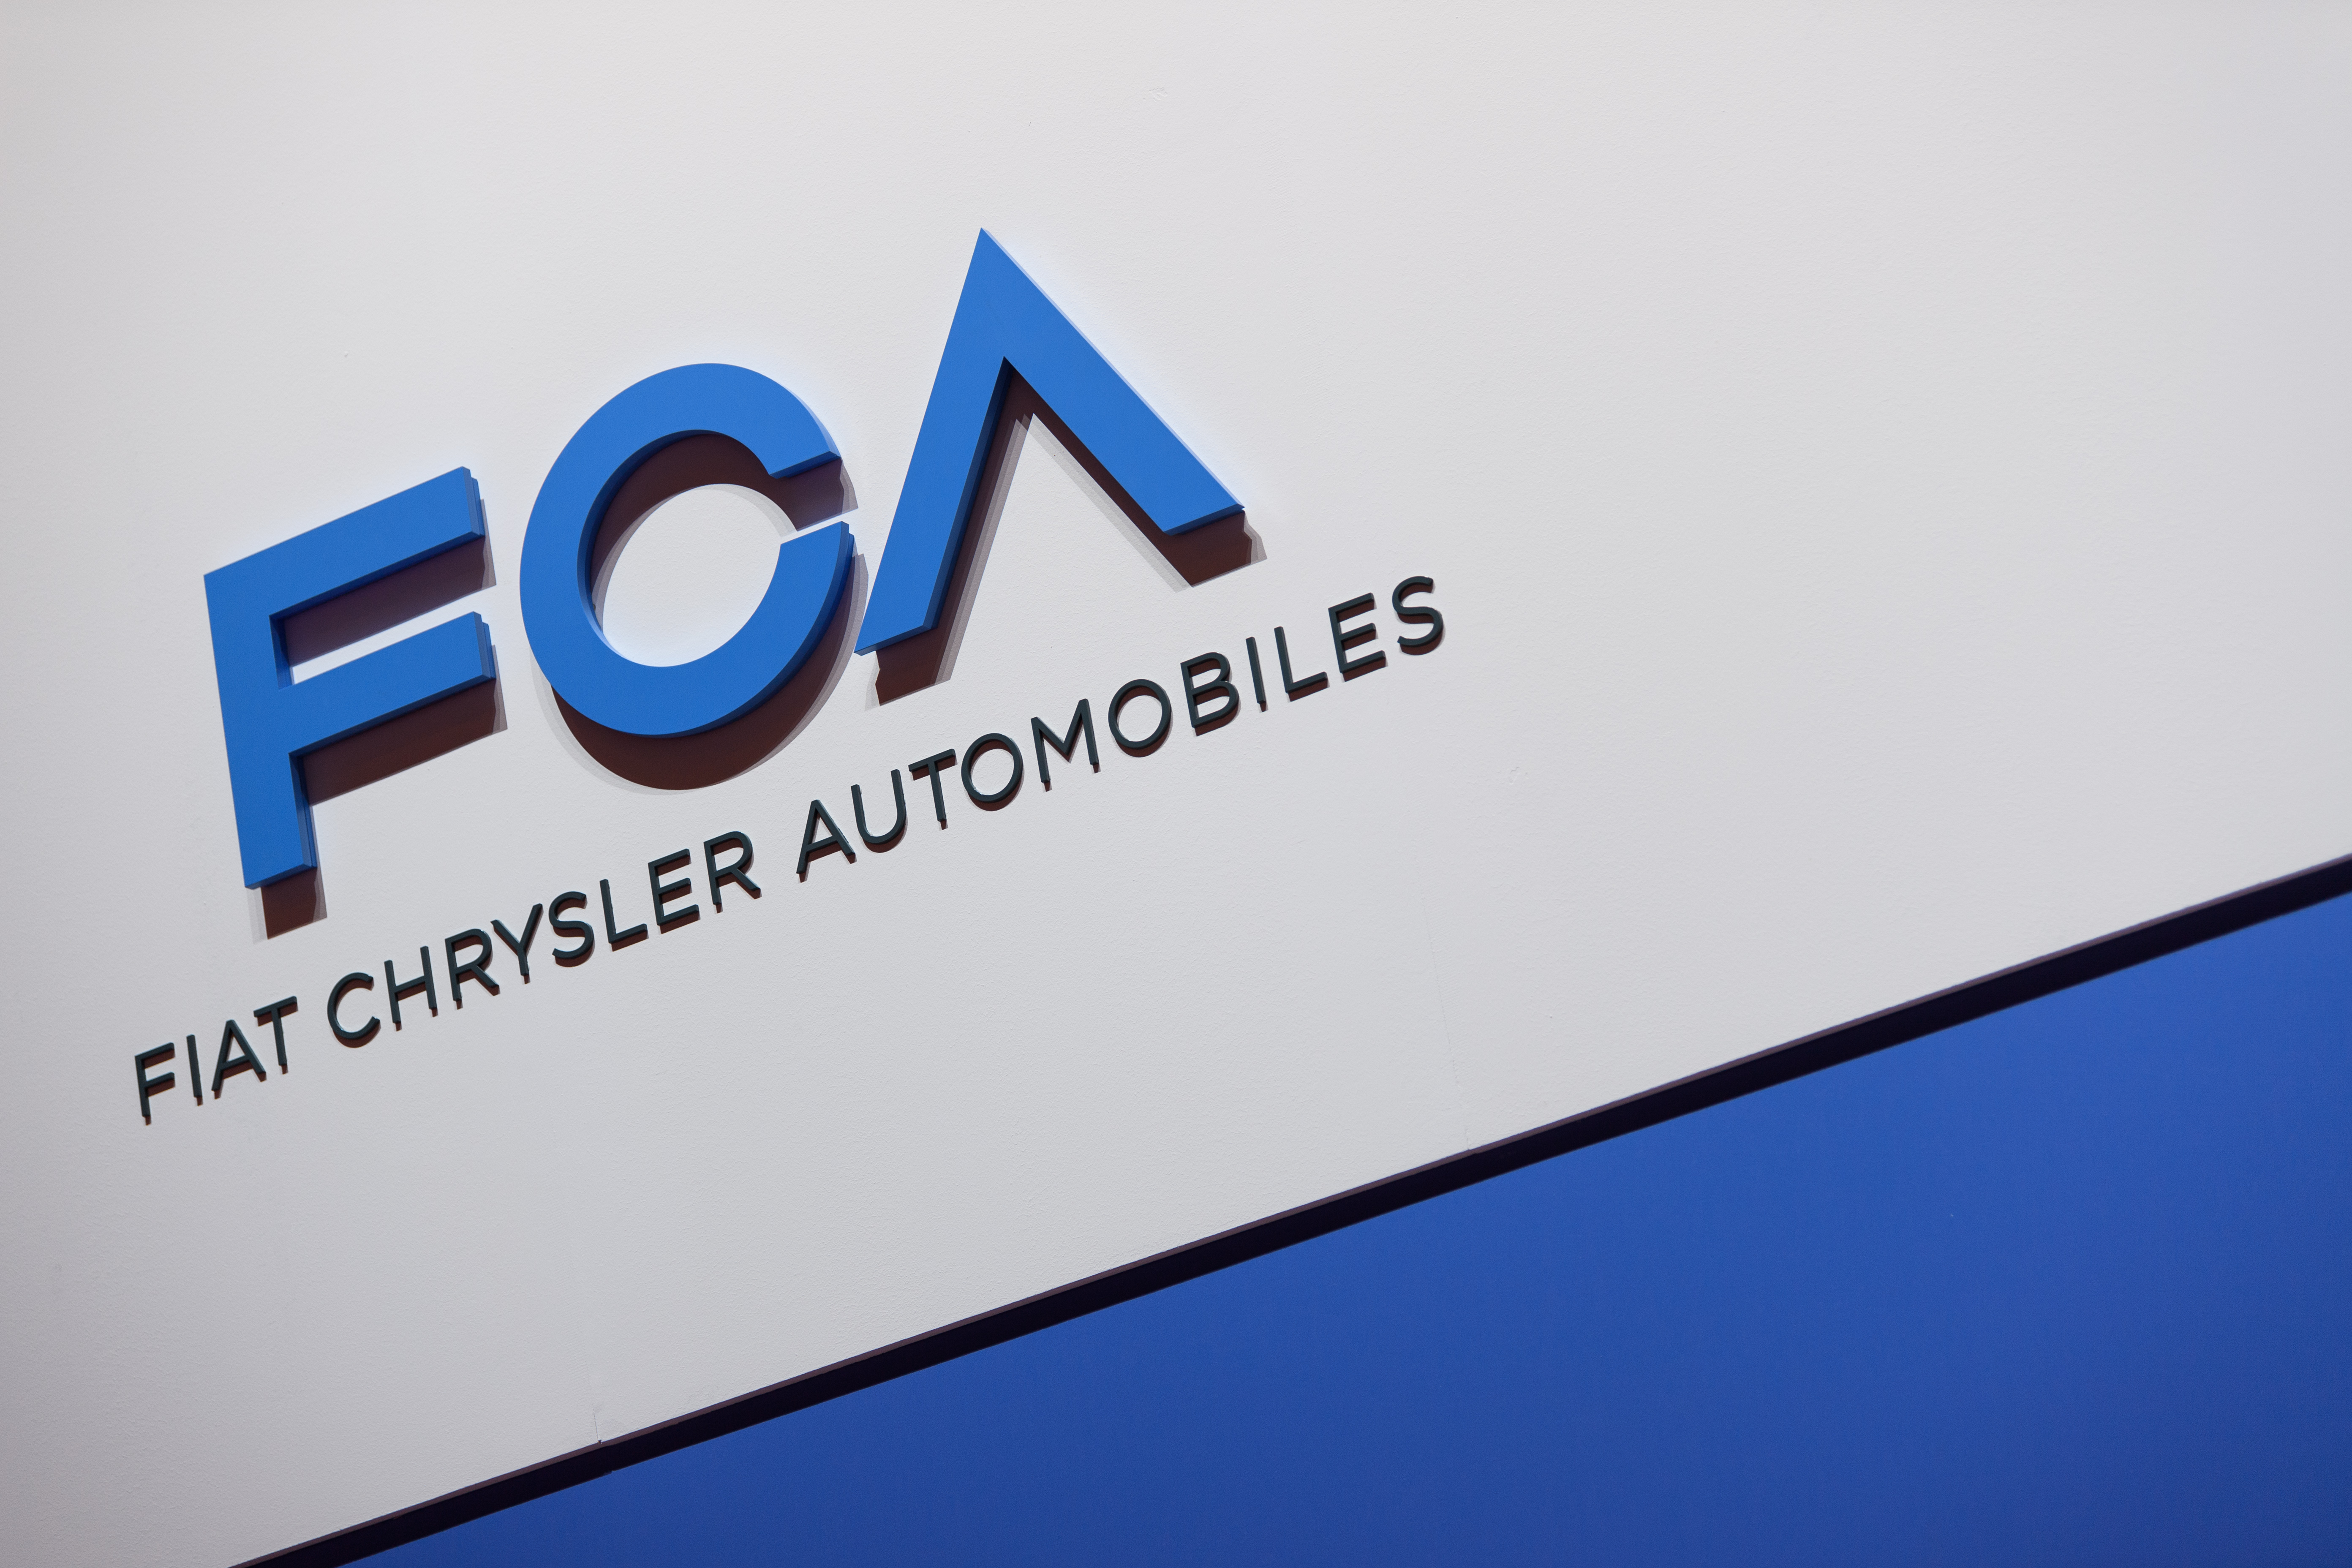 FCA recovers financially from difficult year